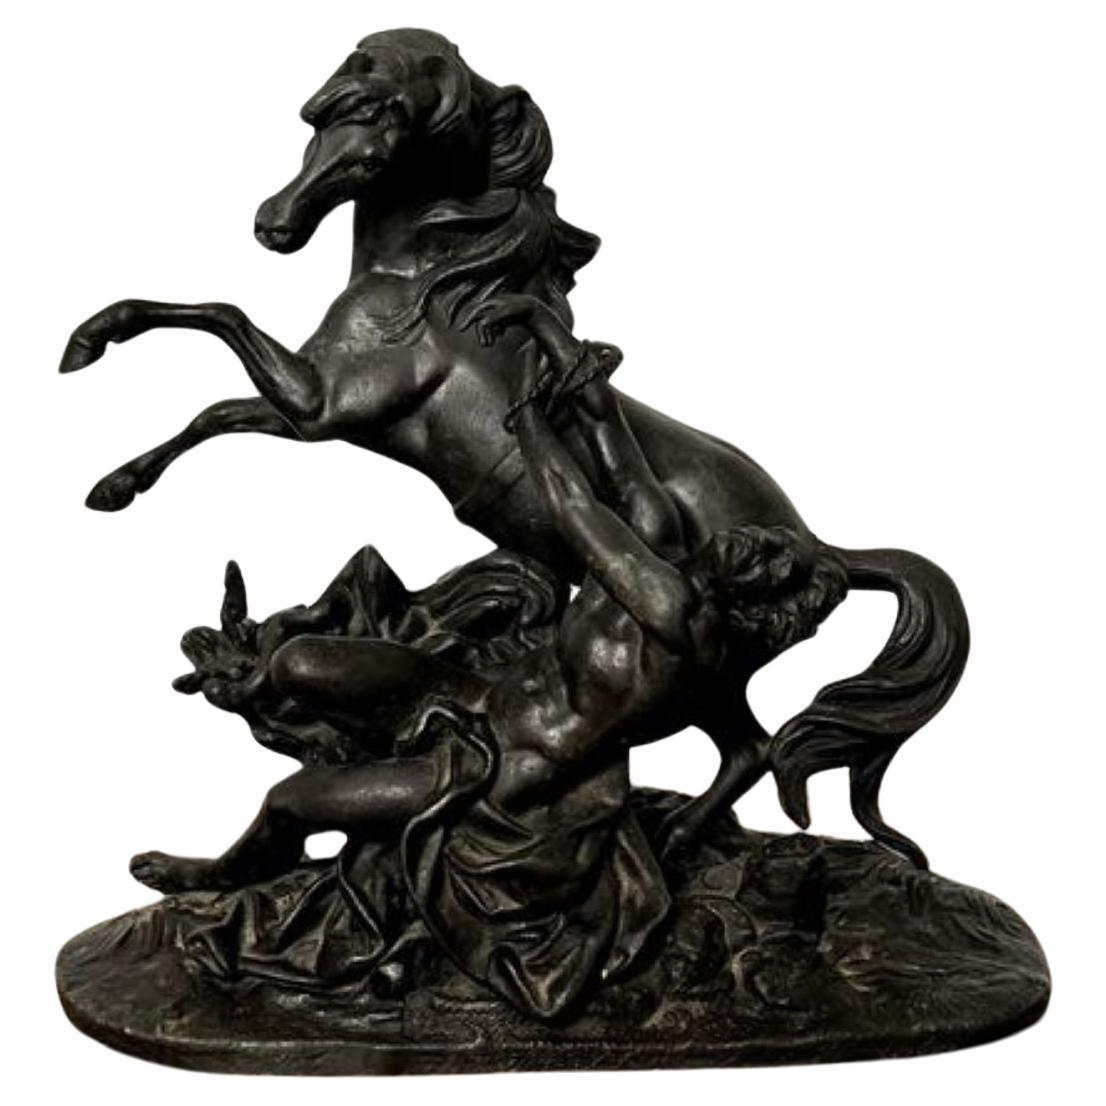 Quality antique Victorian spelter figure  For Sale